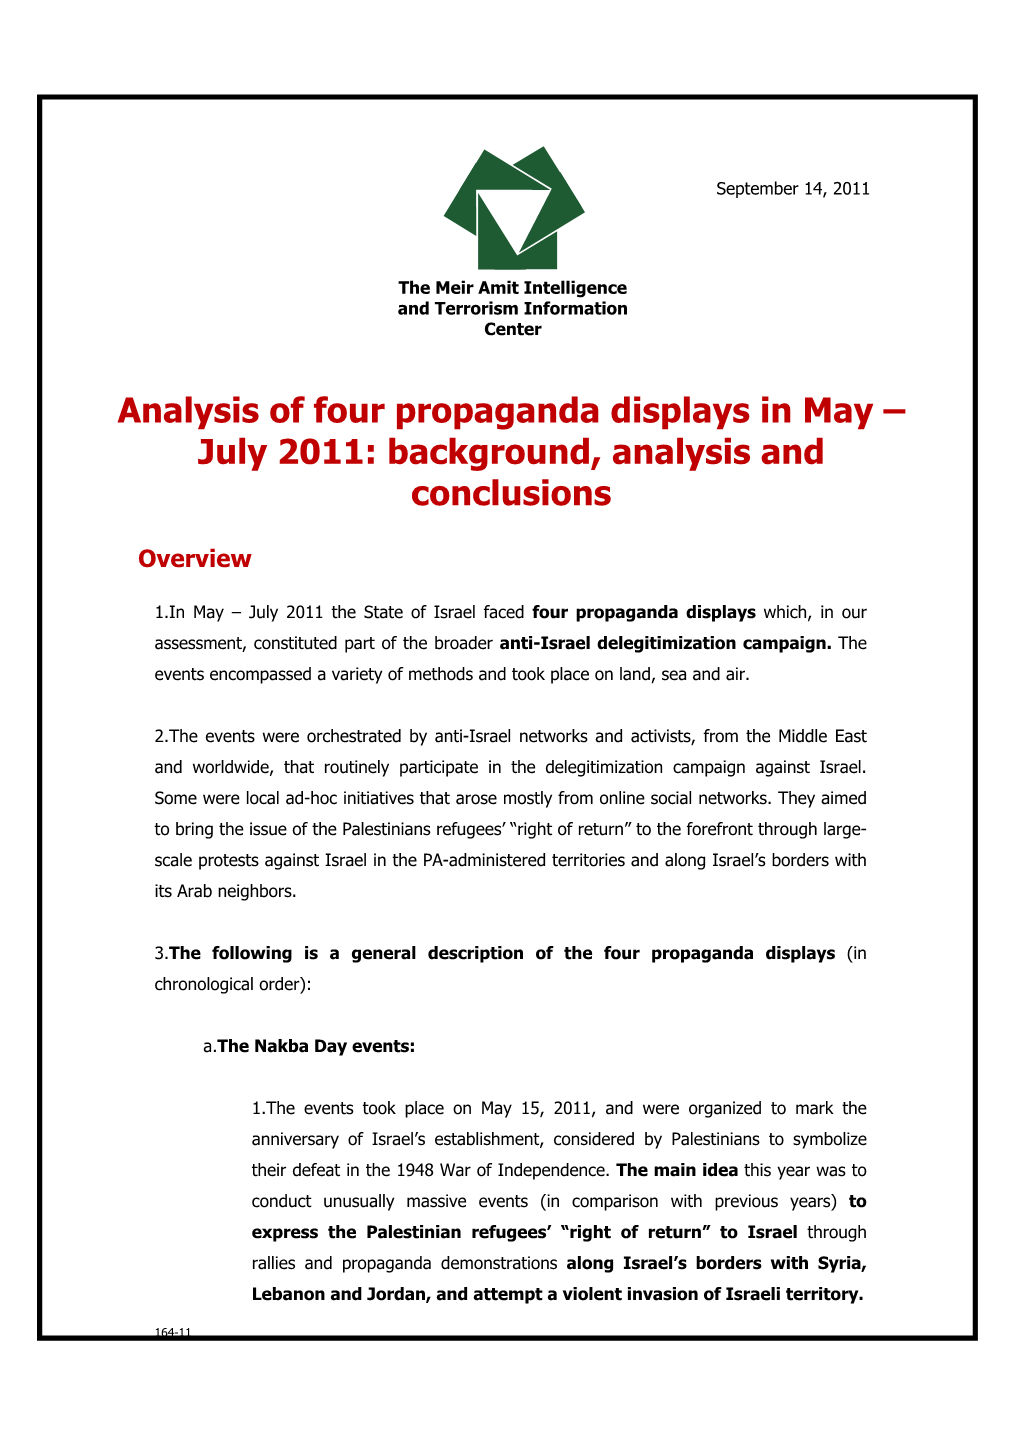 Analysis of Four Propaganda Displays in May – July 2011: Background, Analysis and Conclusions